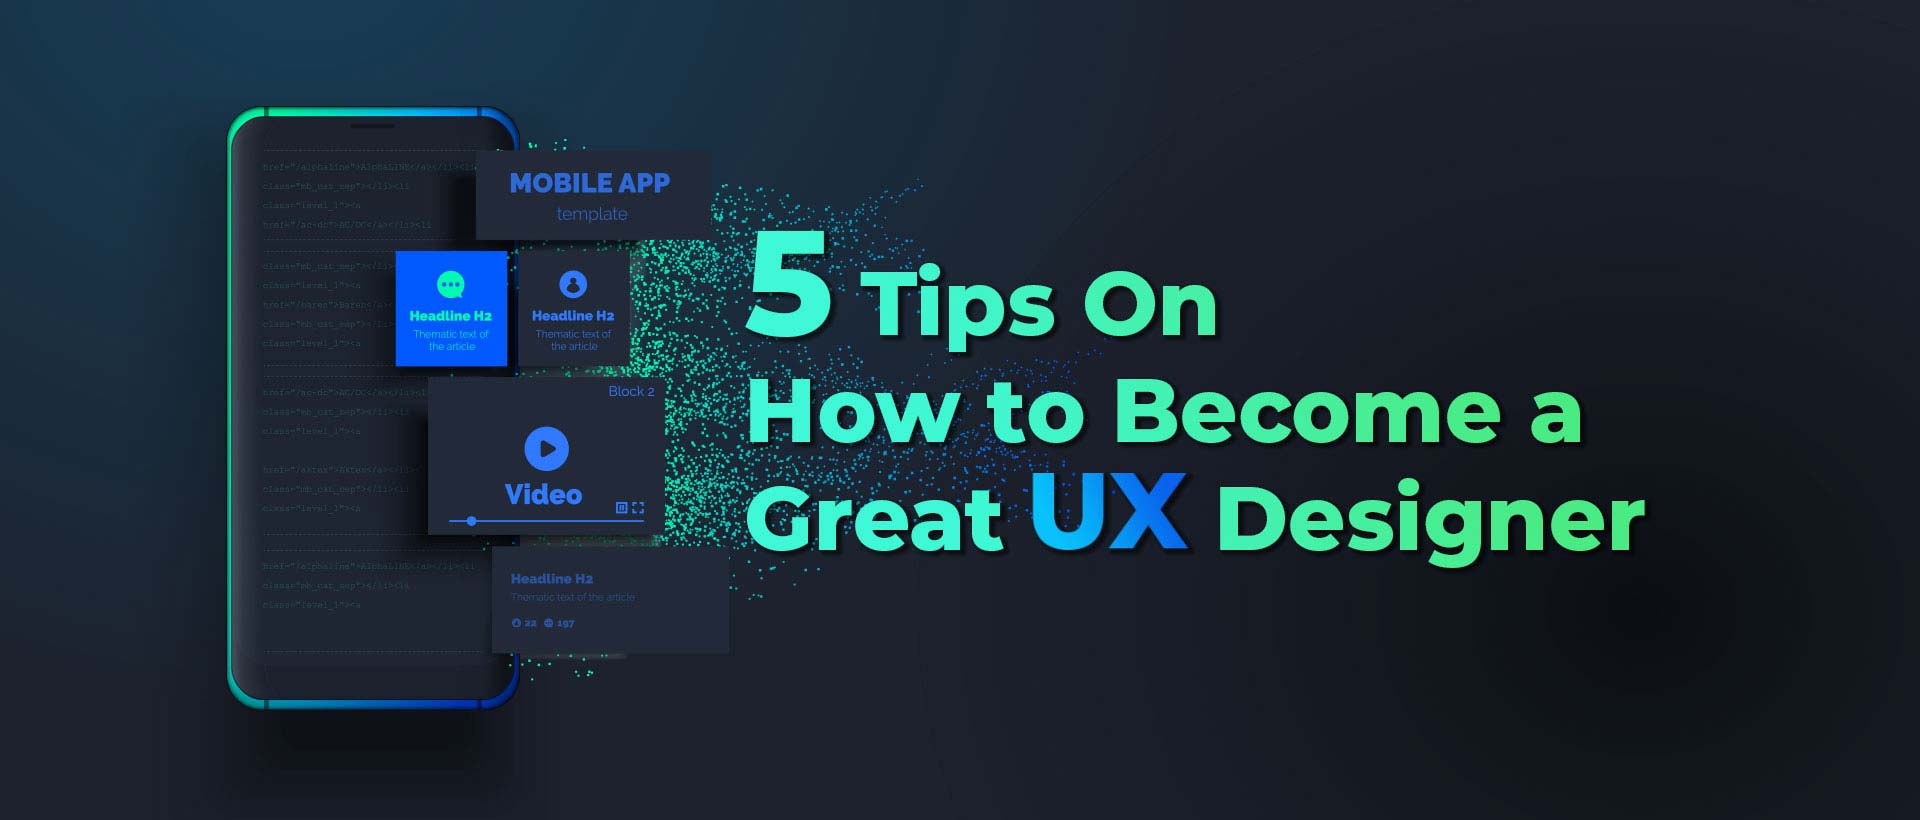 5 Tips On How to Become a Great UX Designer